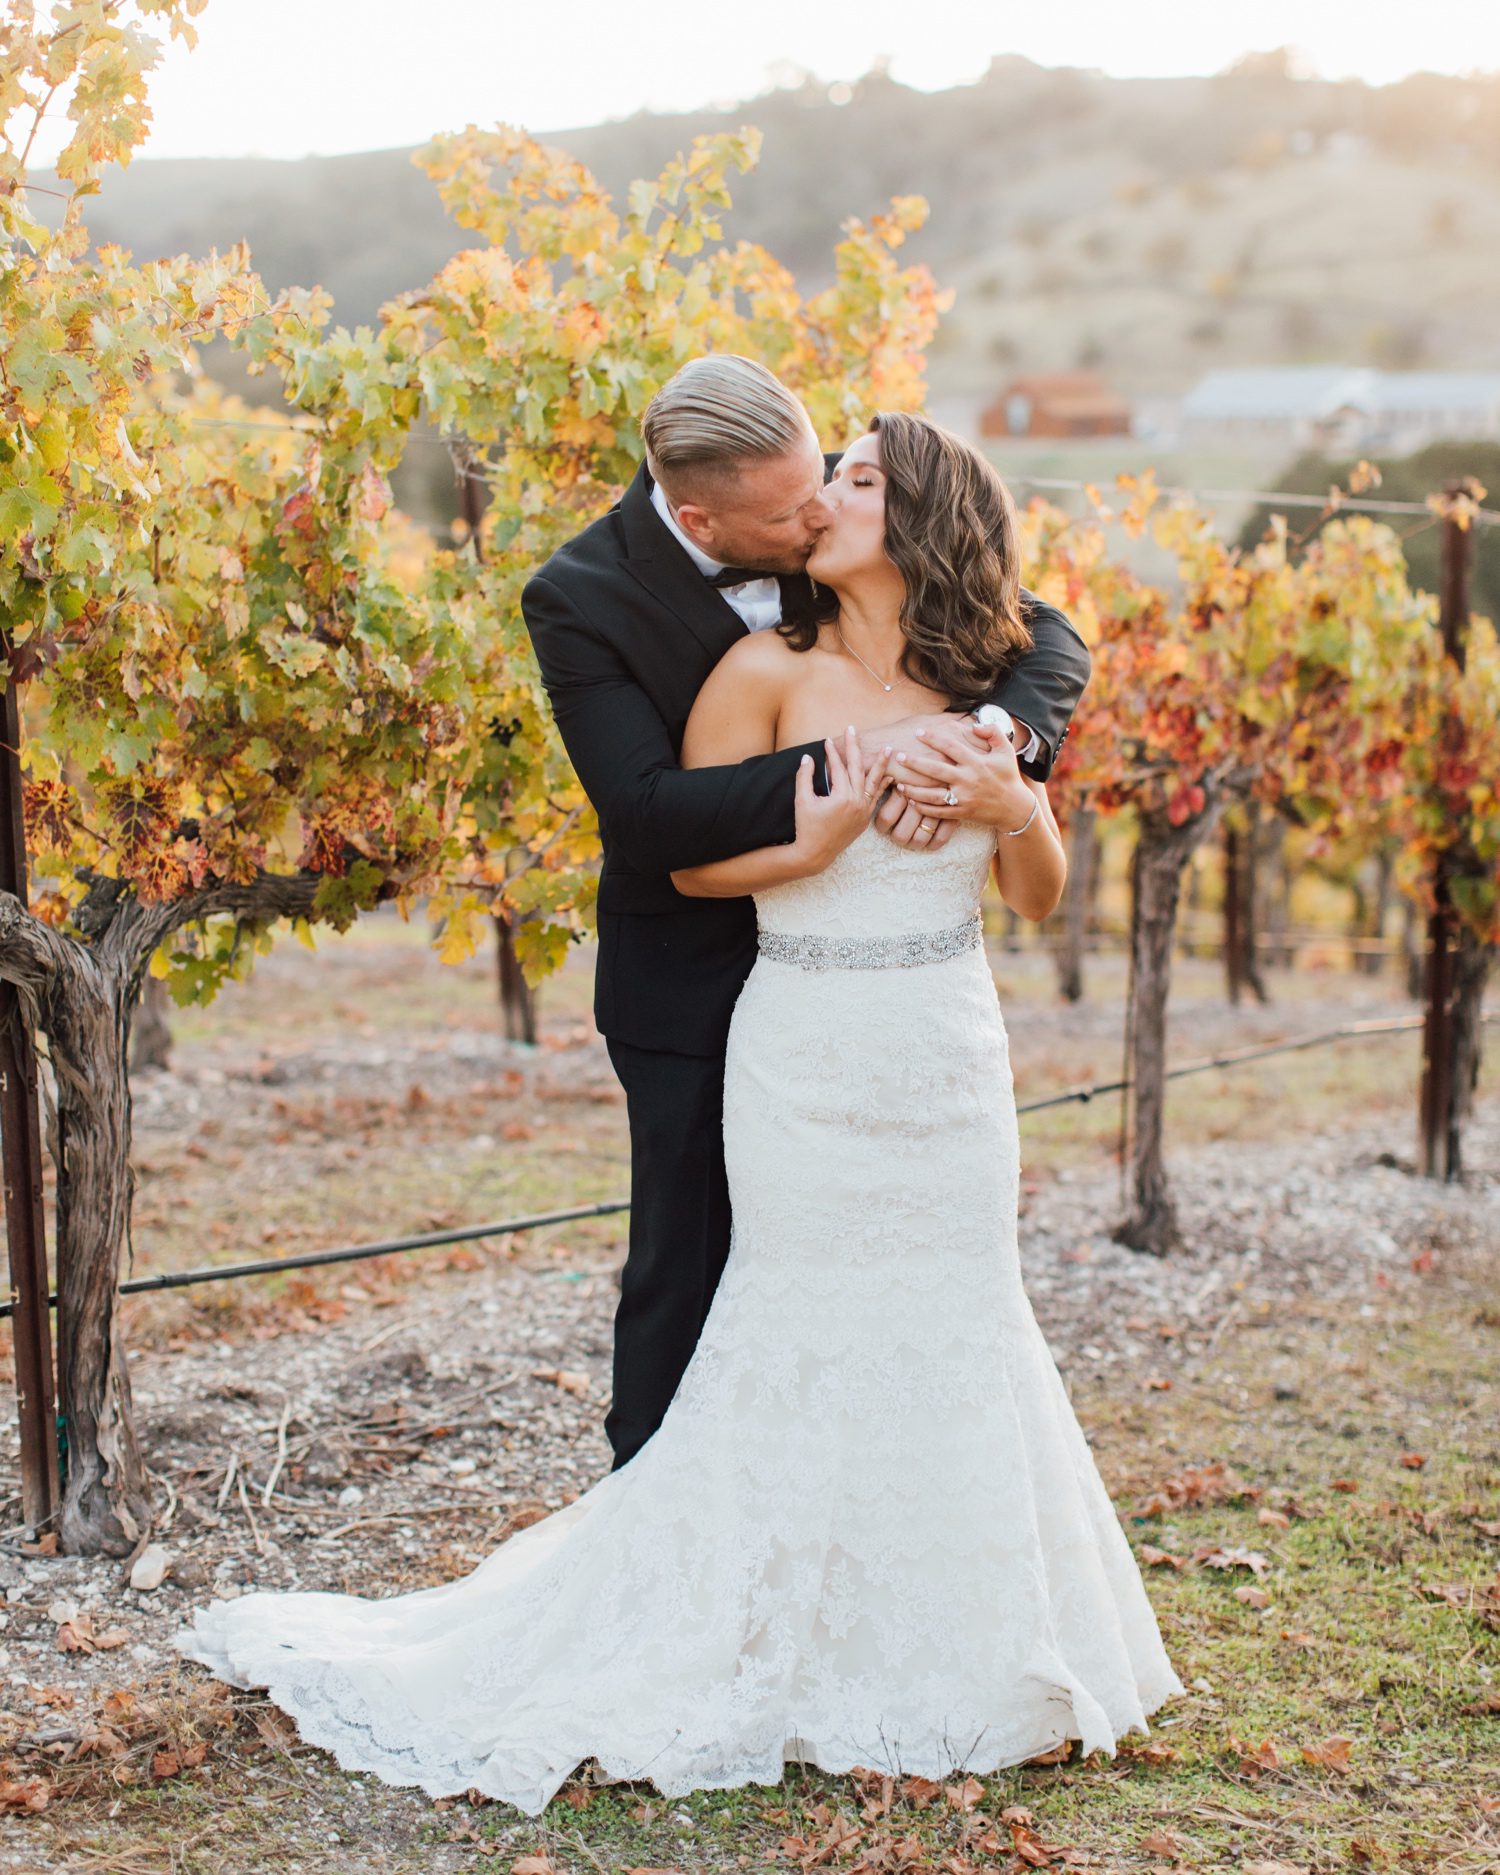 Bride and Groom kissing in wine country wedding venue by Paso Robles photographer Jessica Sofranko